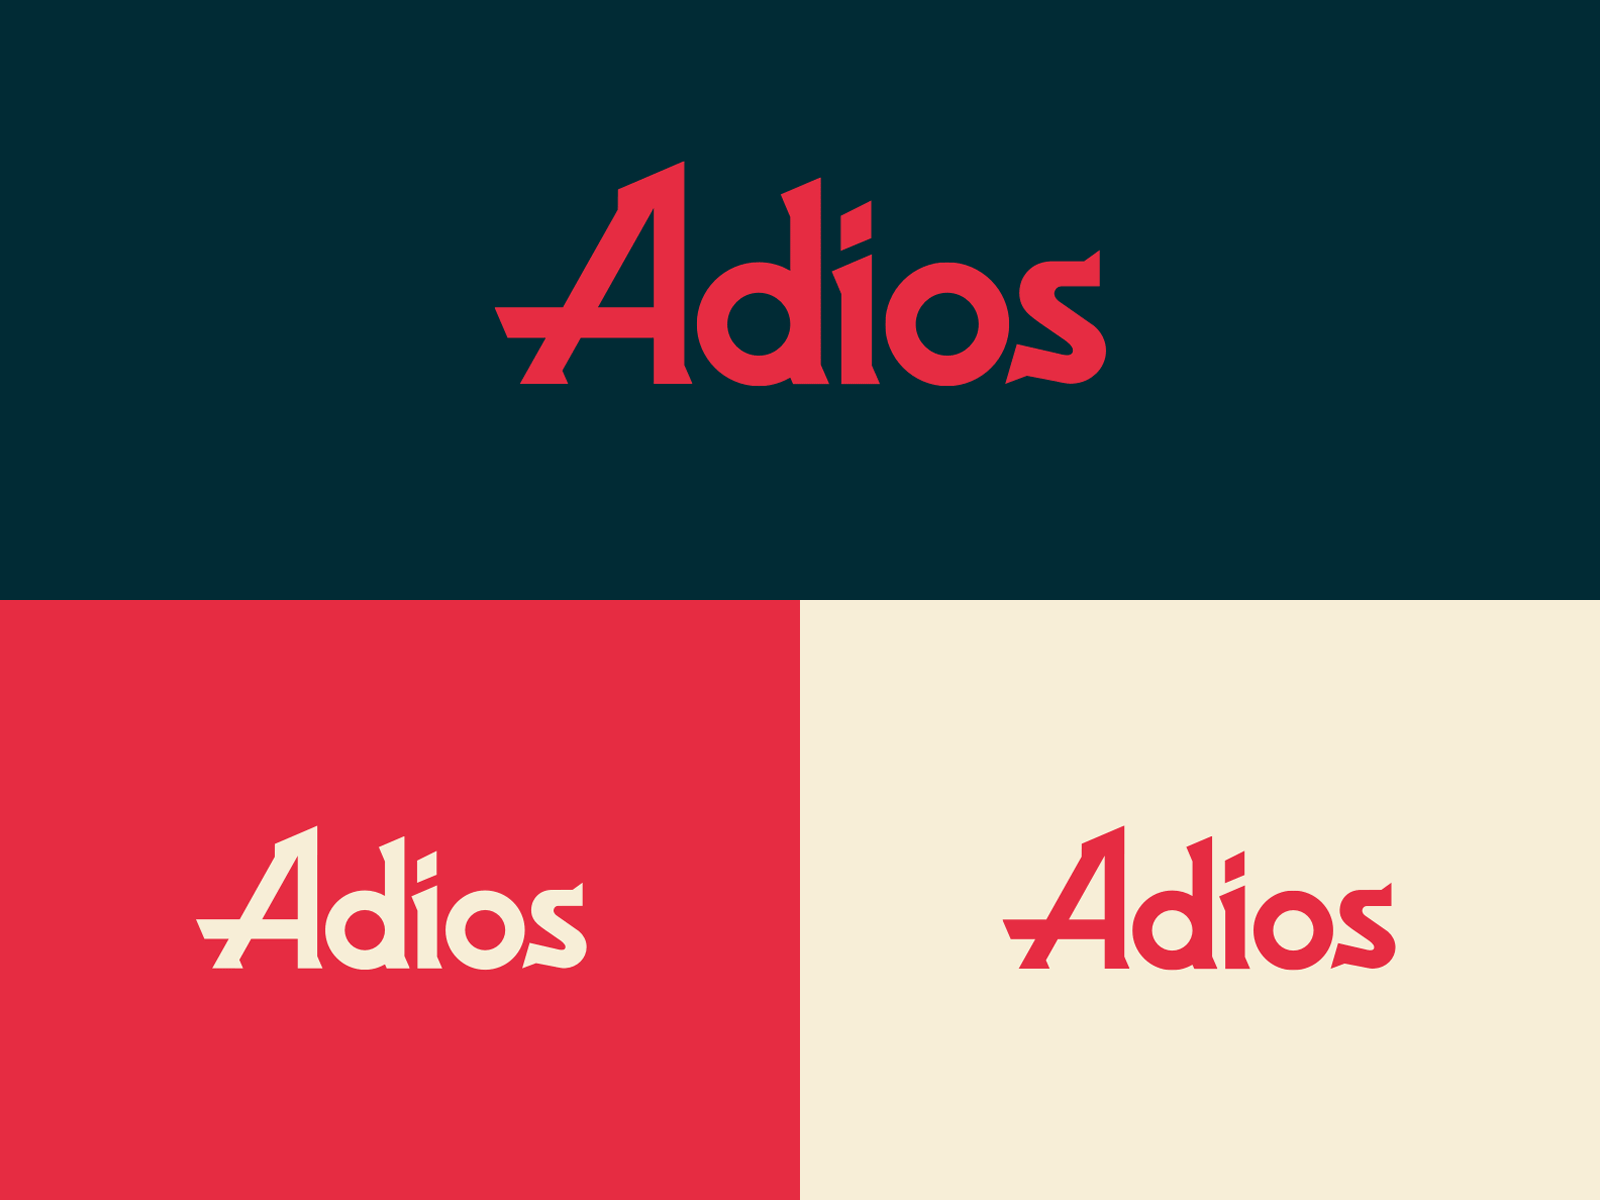 Adios Branding & Patches adios brand identity branding branding and identity branding design creative agency design design agency graphic design illustration logotype patch patches product design typography website